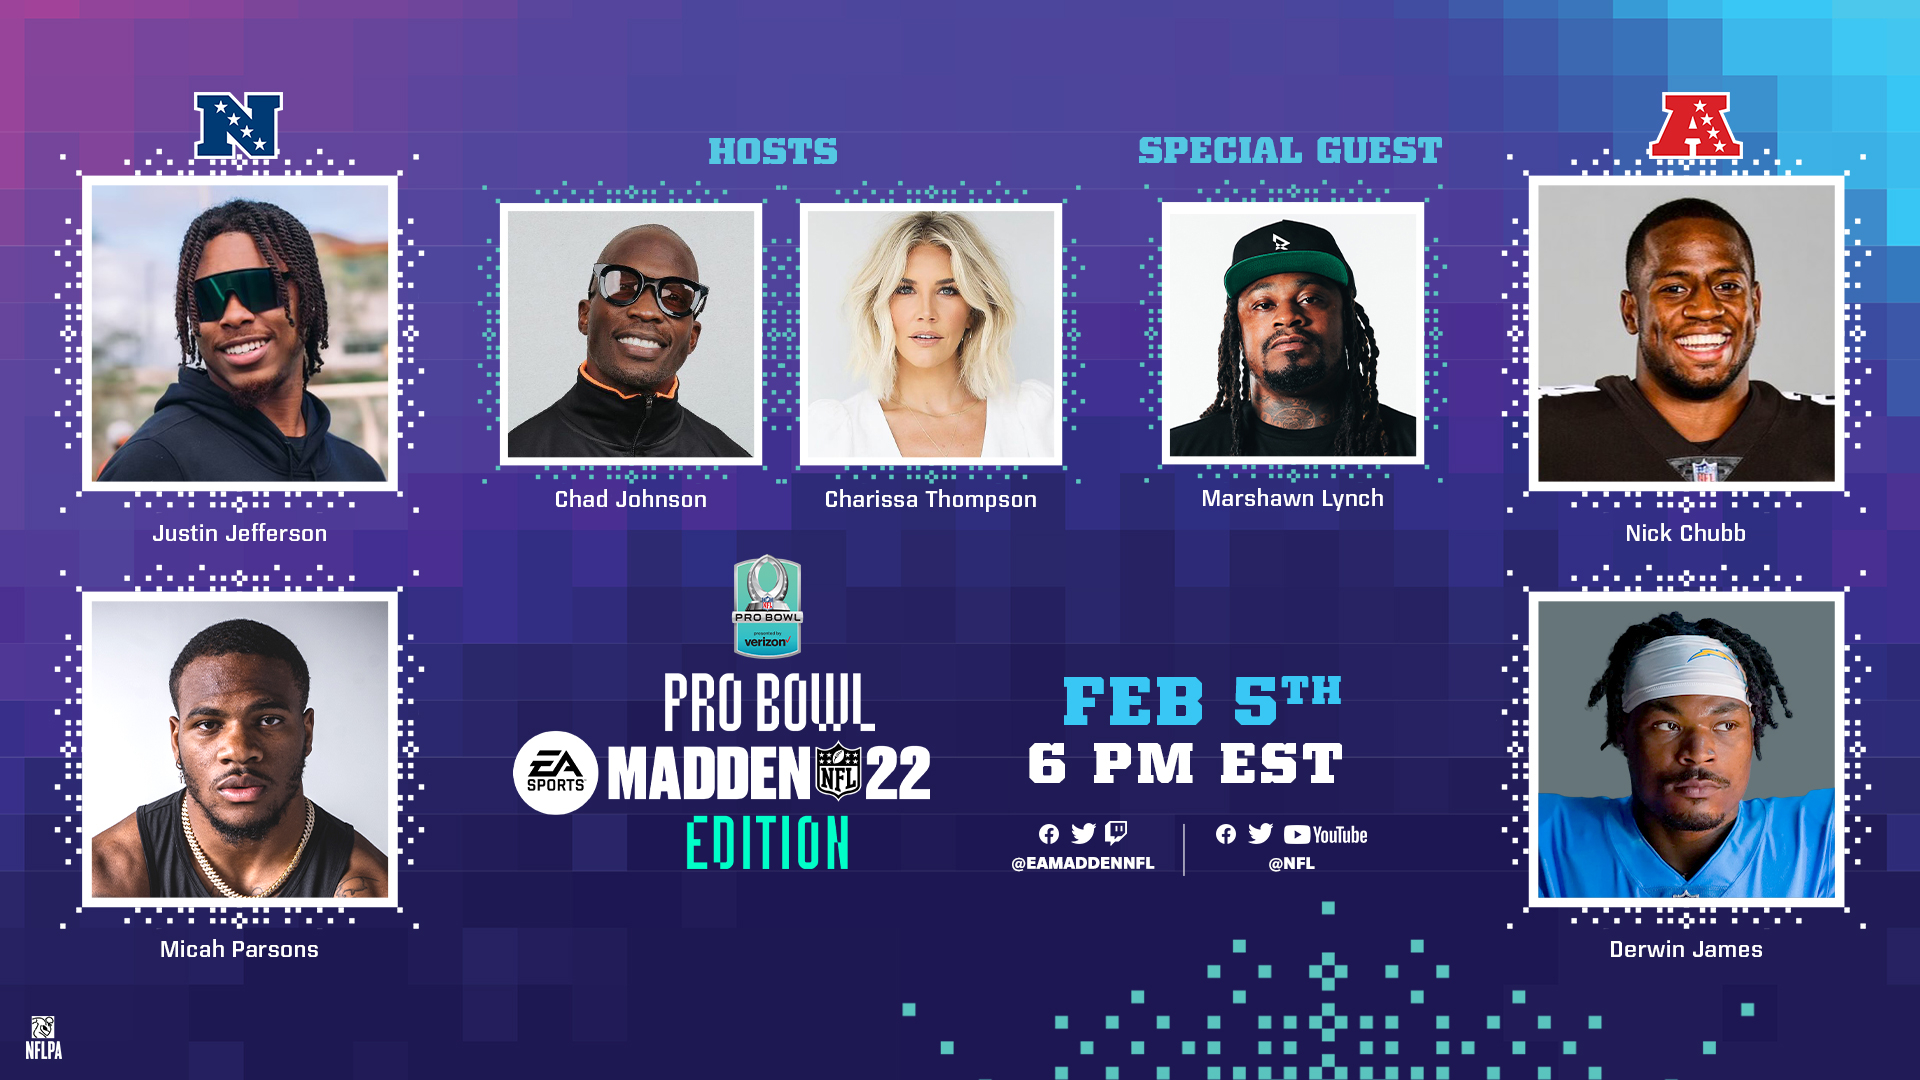 NFL, Electronic Arts Bring Back Madden 22 Virtual Event During Pro Bowl  Weekend in Las Vegas